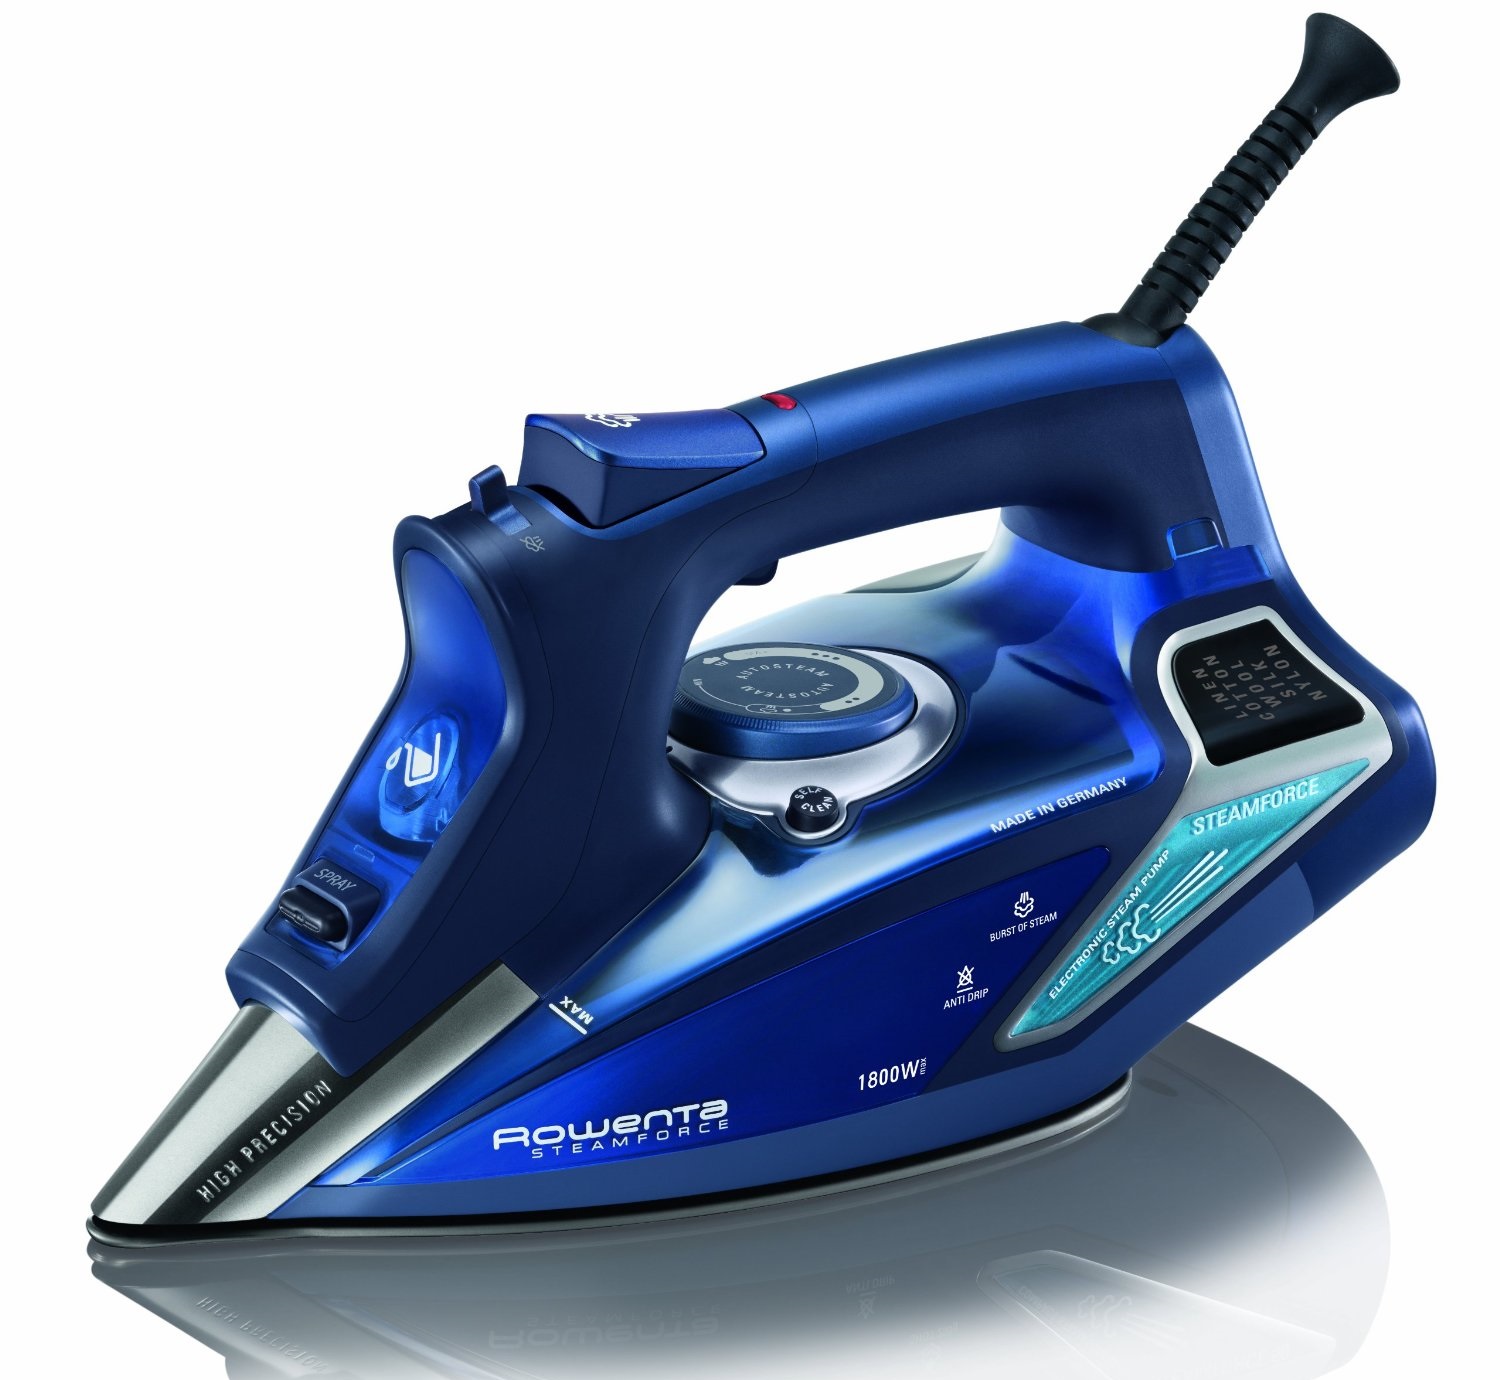 Rowenta DW9280 Review Buy This Steam Force Iron?